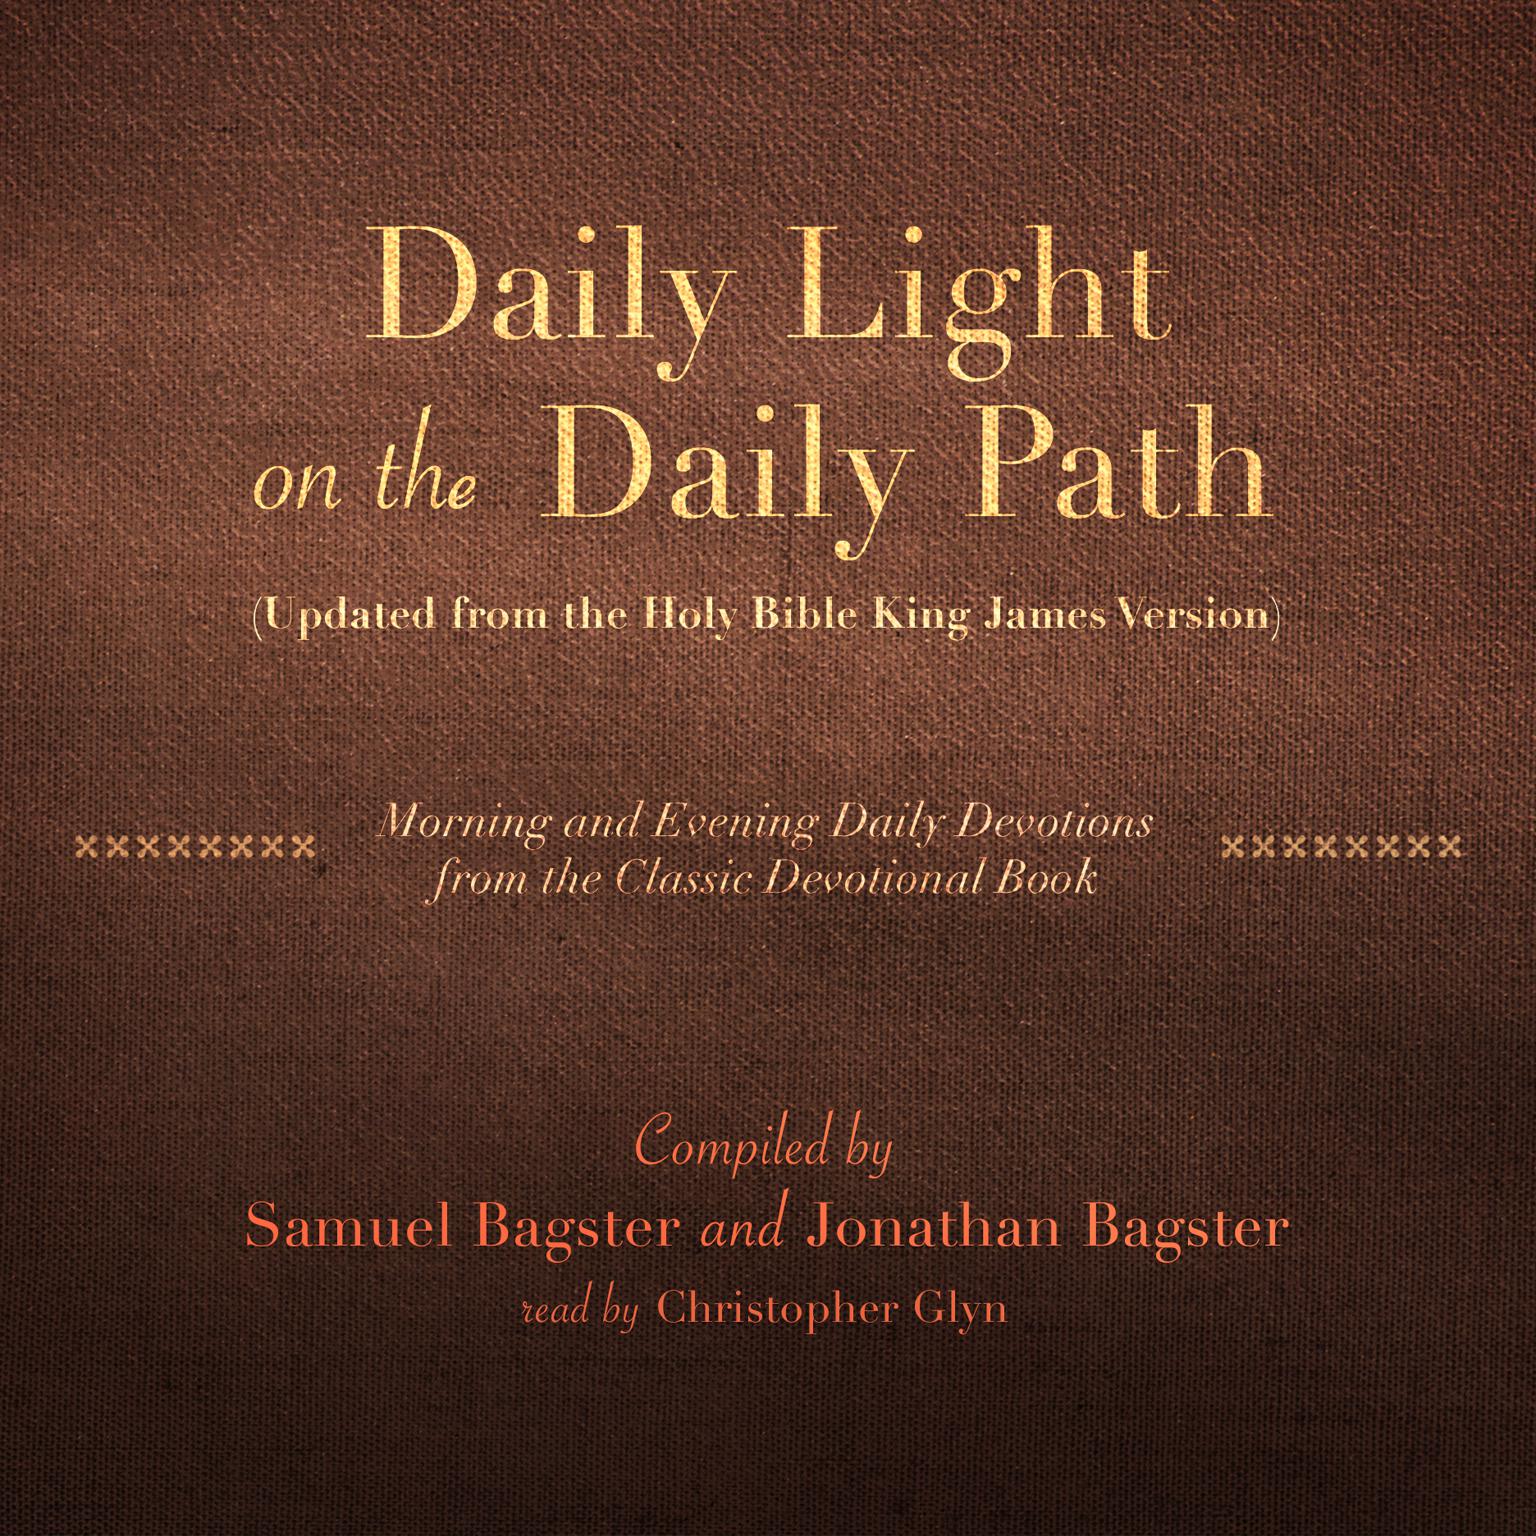 Daily Light on the Daily Path (Updated from the Holy Bible King James Version): Morning and Evening Daily Devotions from the Classic Devotional Book Audiobook, by Samuel Bagster